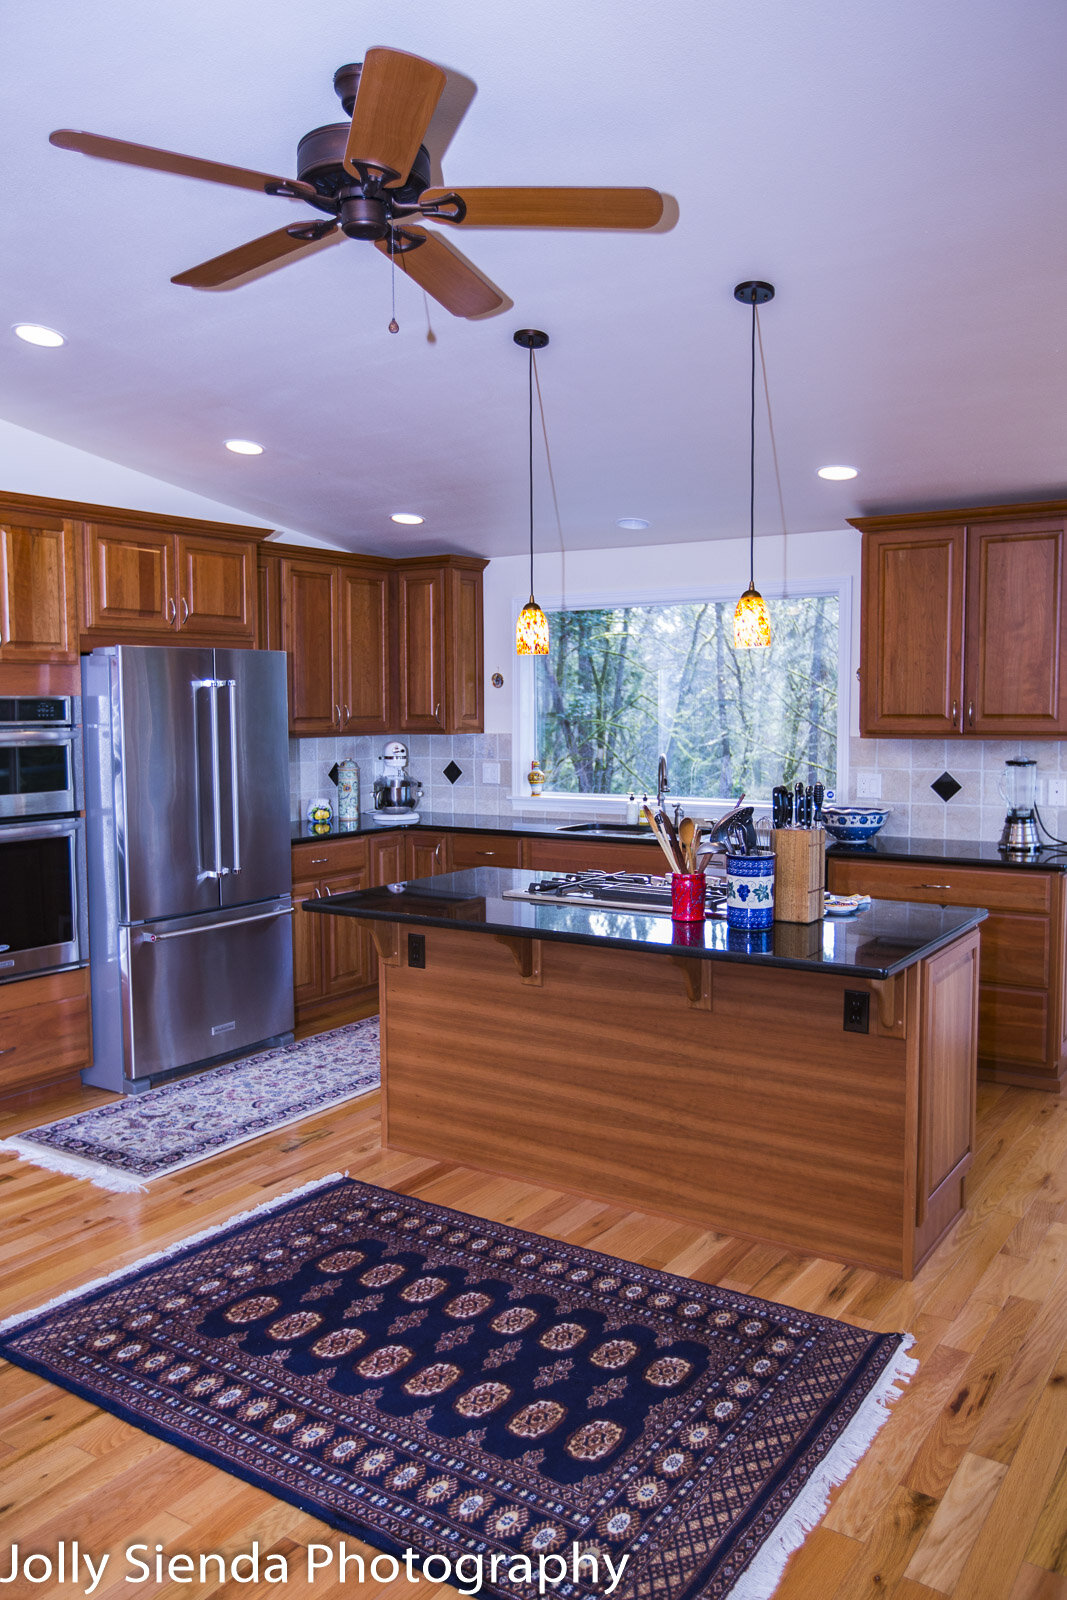 Residential real estate photography, gourmet kitchen